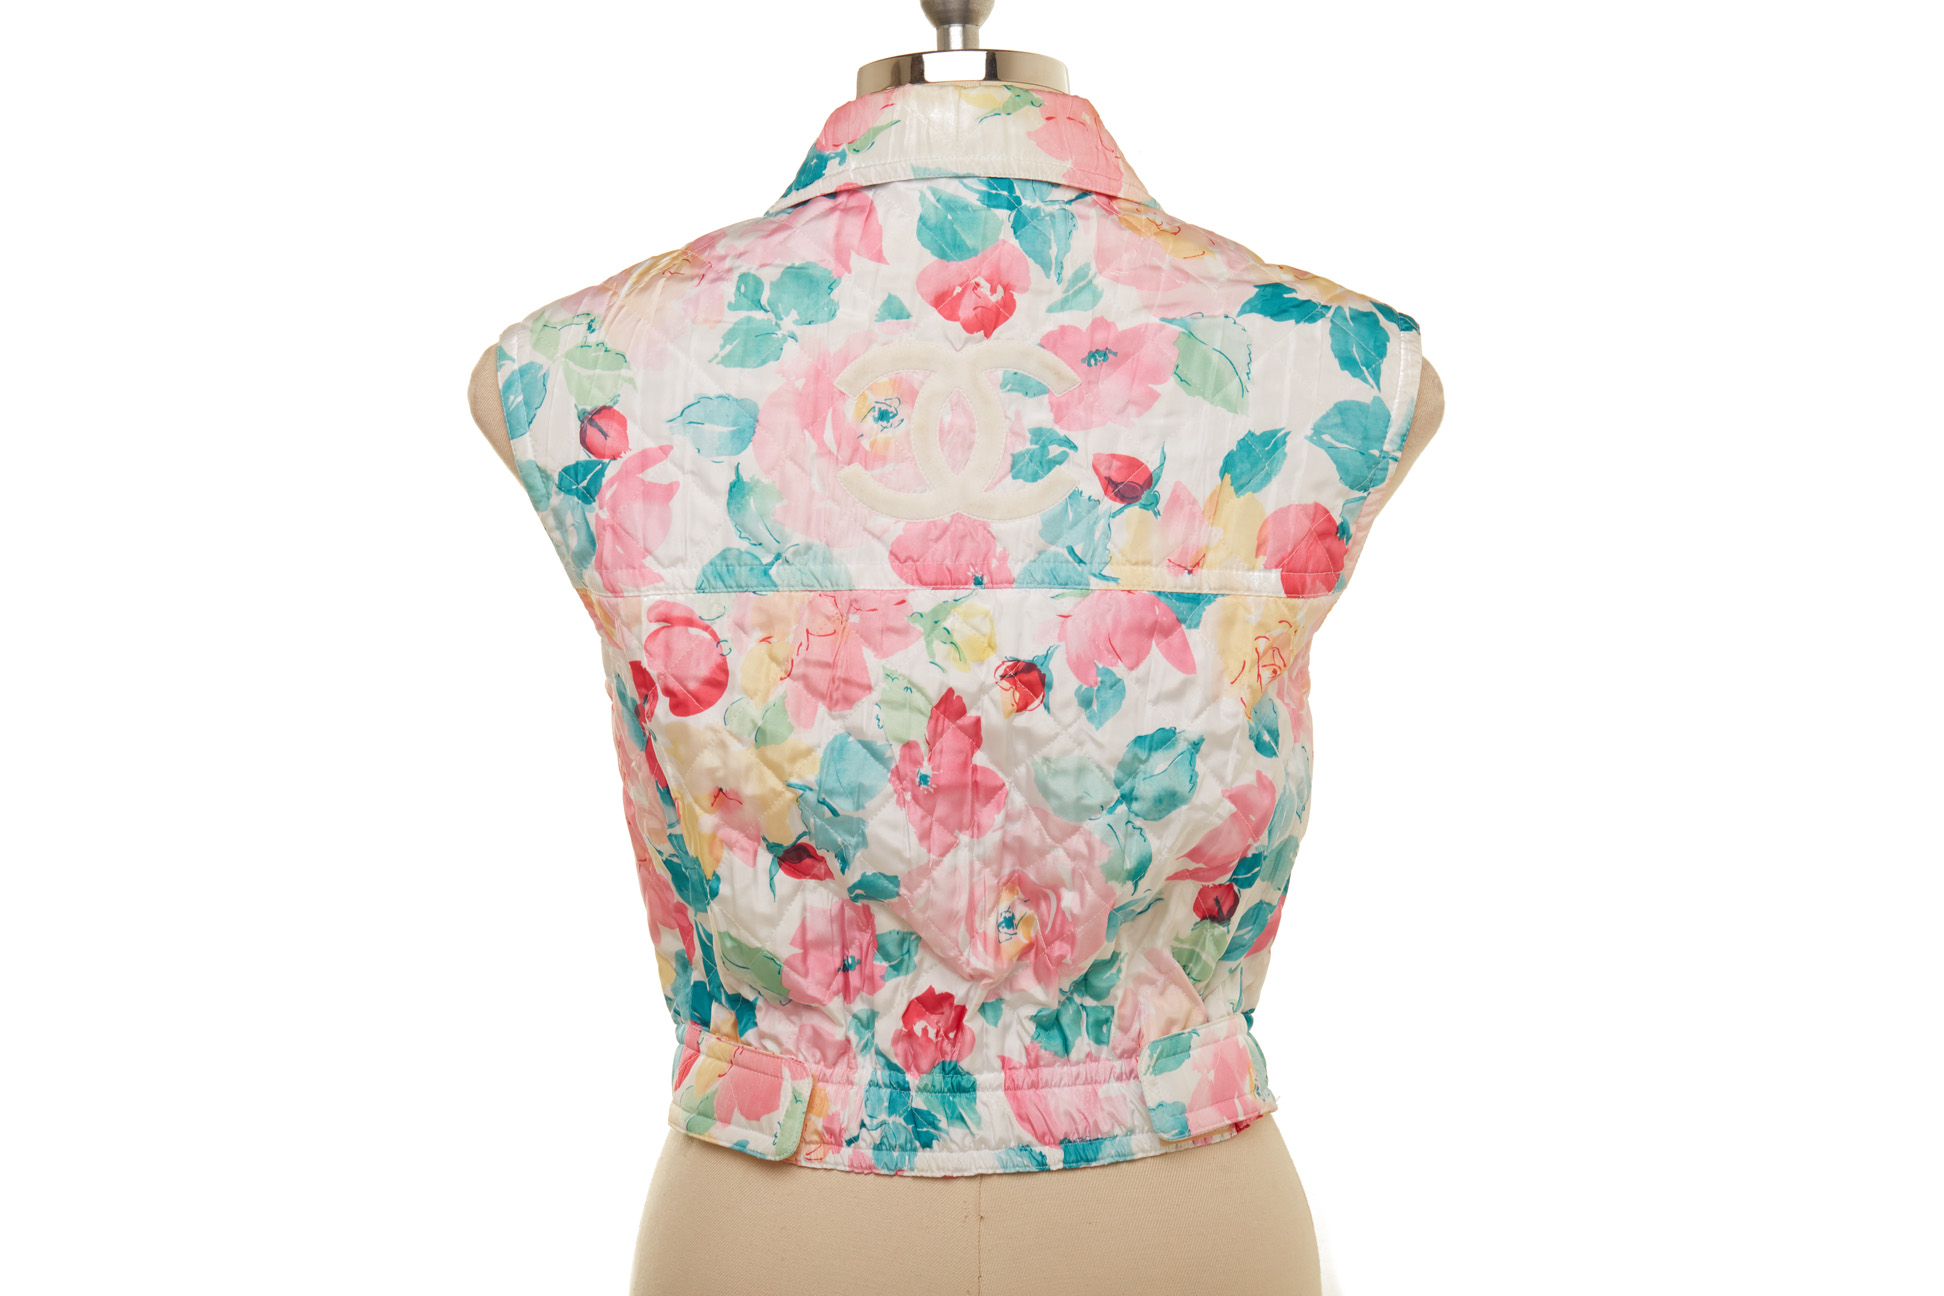 A CHANEL FLORAL QUILTED CROPPED GILET - Image 2 of 3